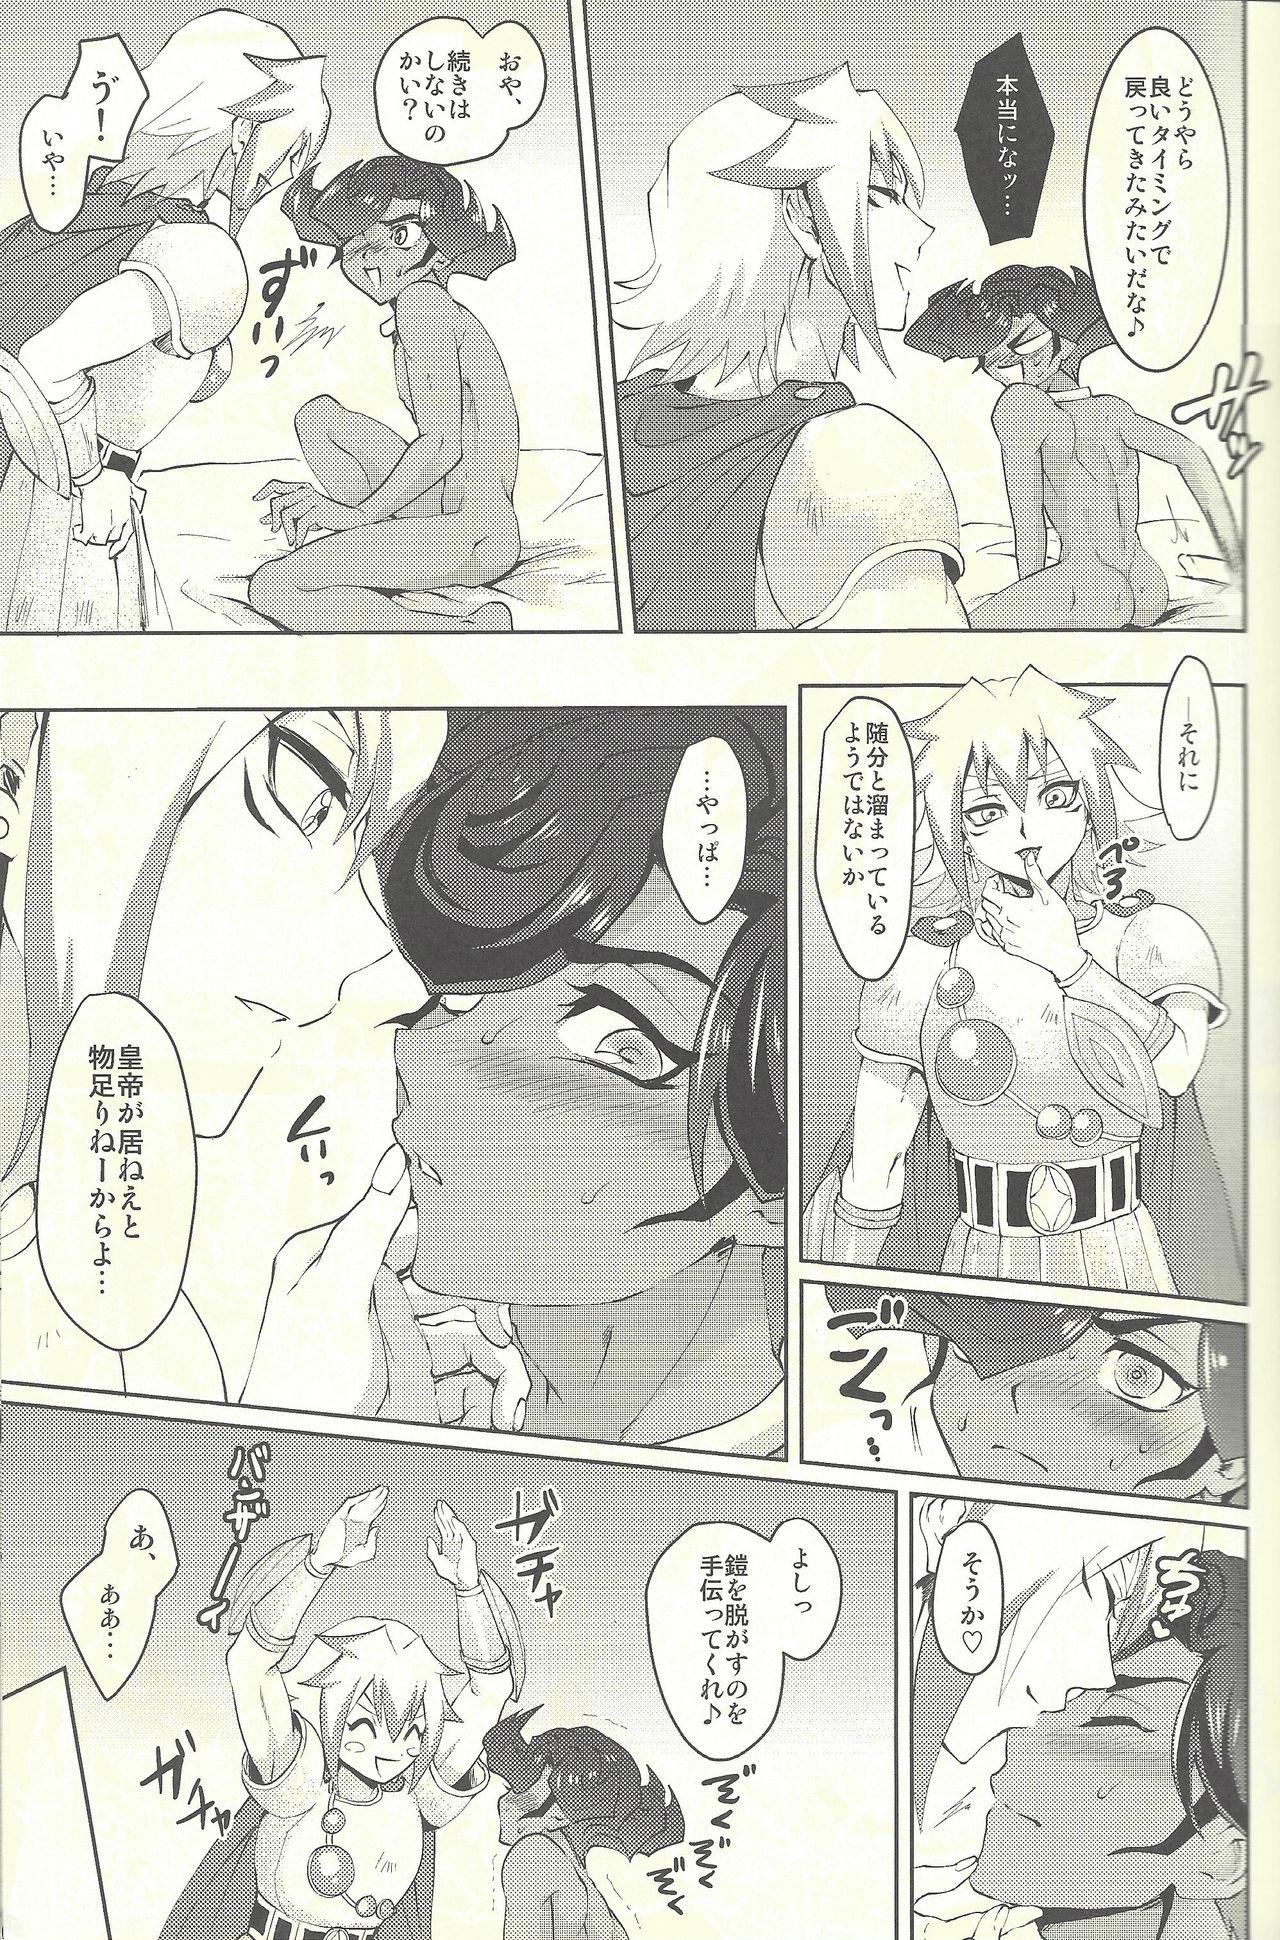 Brother Sister Emperor's Love!take 2 - Yu-gi-oh zexal Unshaved - Page 10